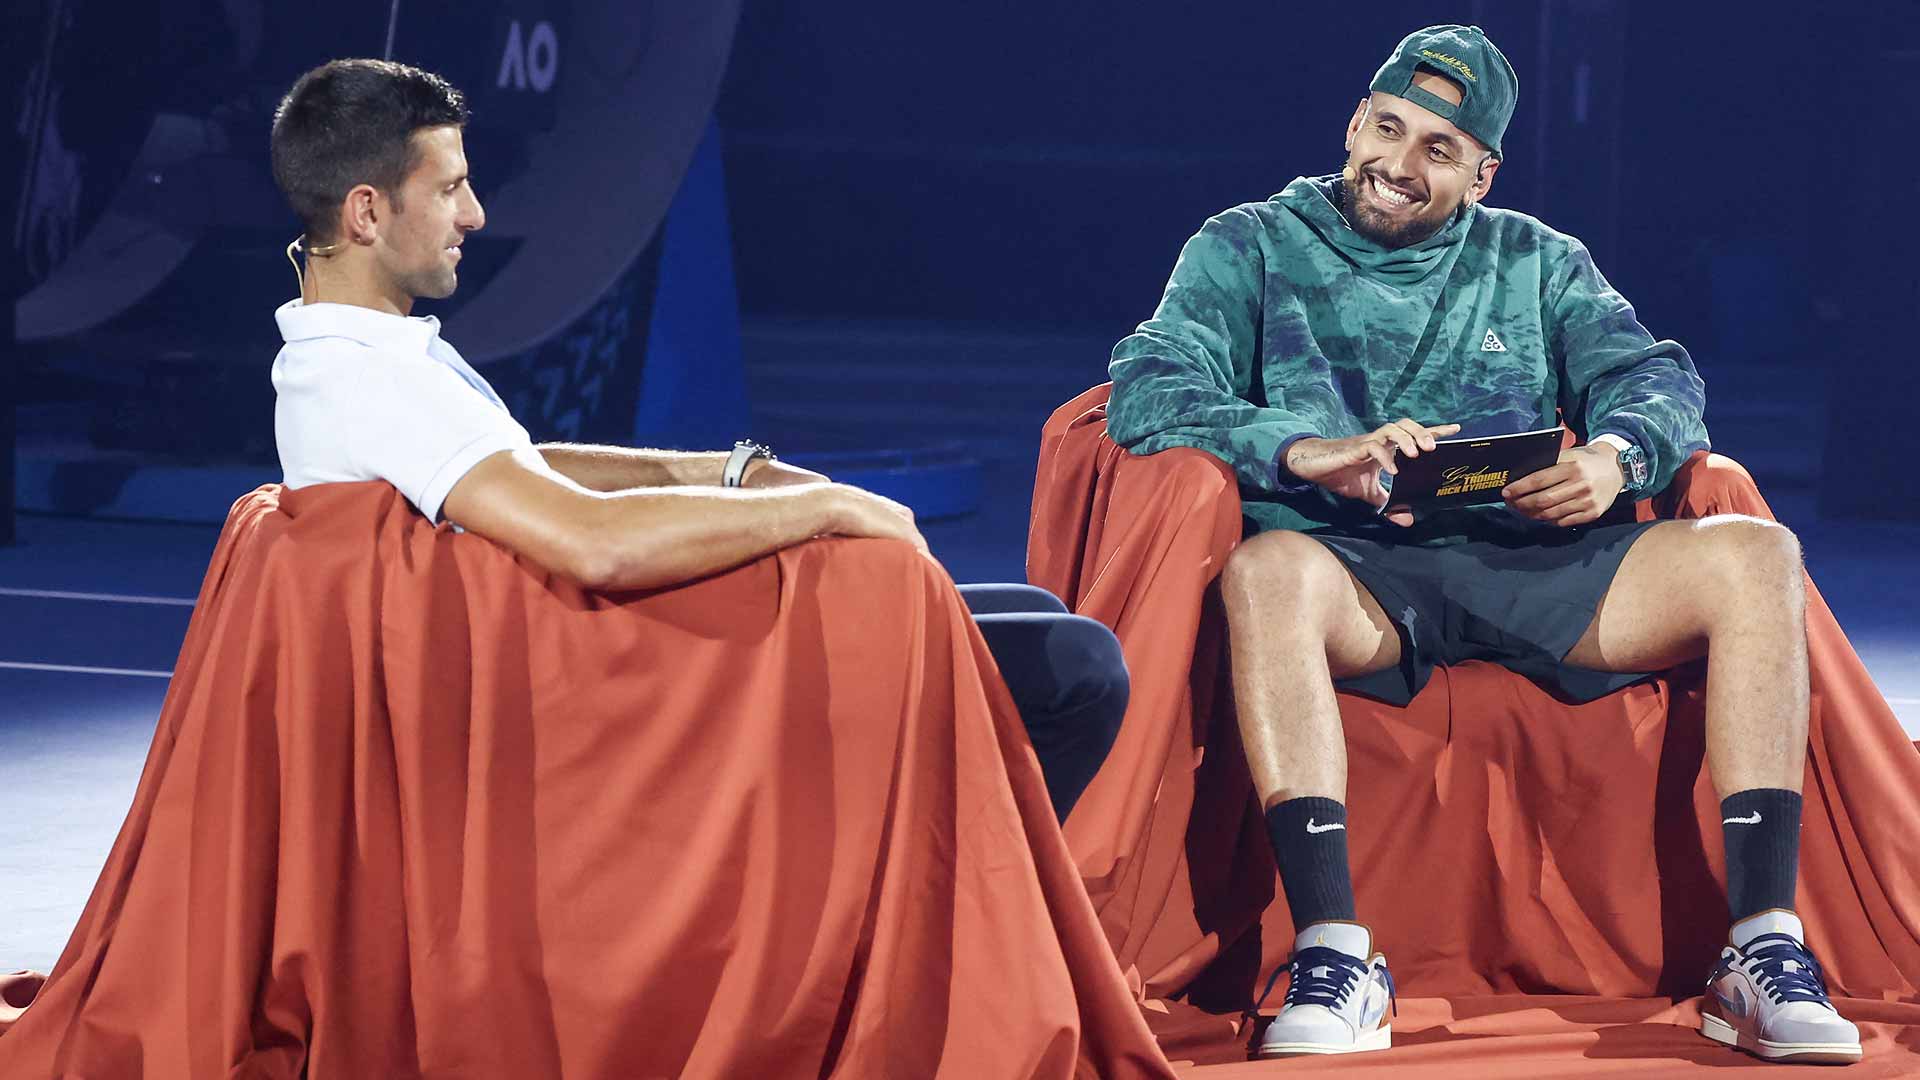 The hilarious offer Djokovic made Kyrgios on Good Trouble